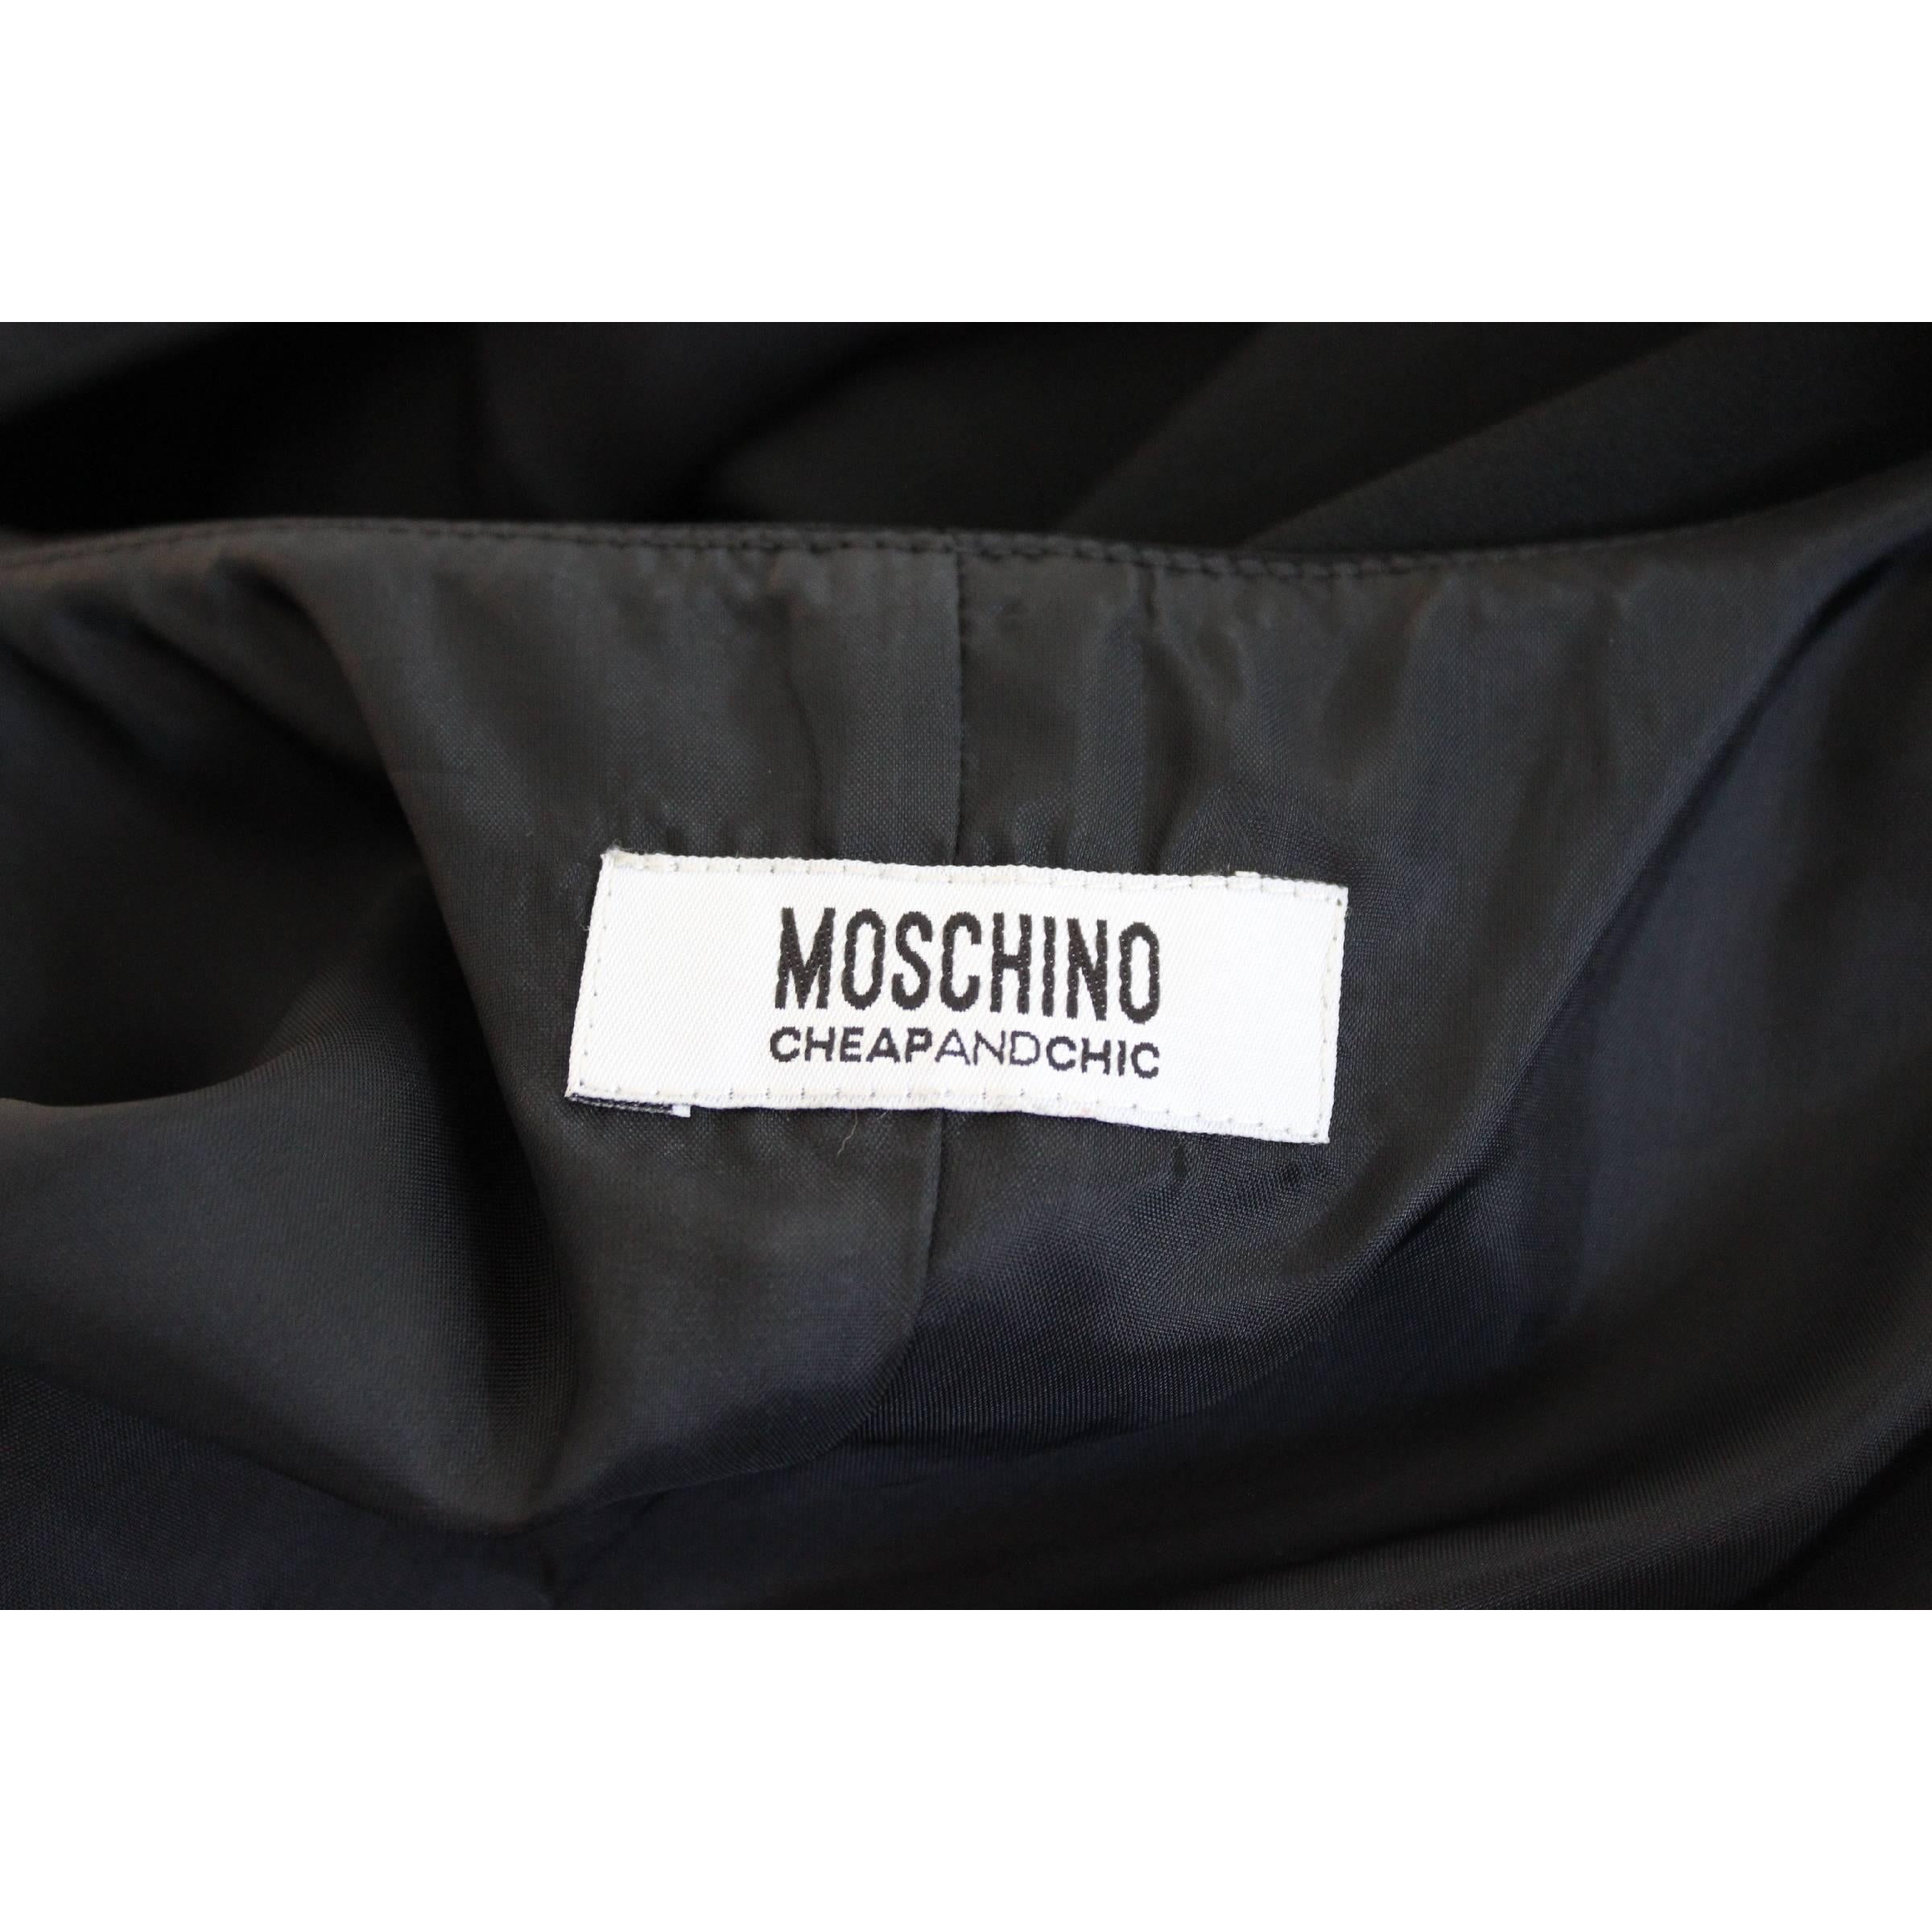 Women's Moschino Cheap and Chic Vintage Black Sheath Dress  For Sale